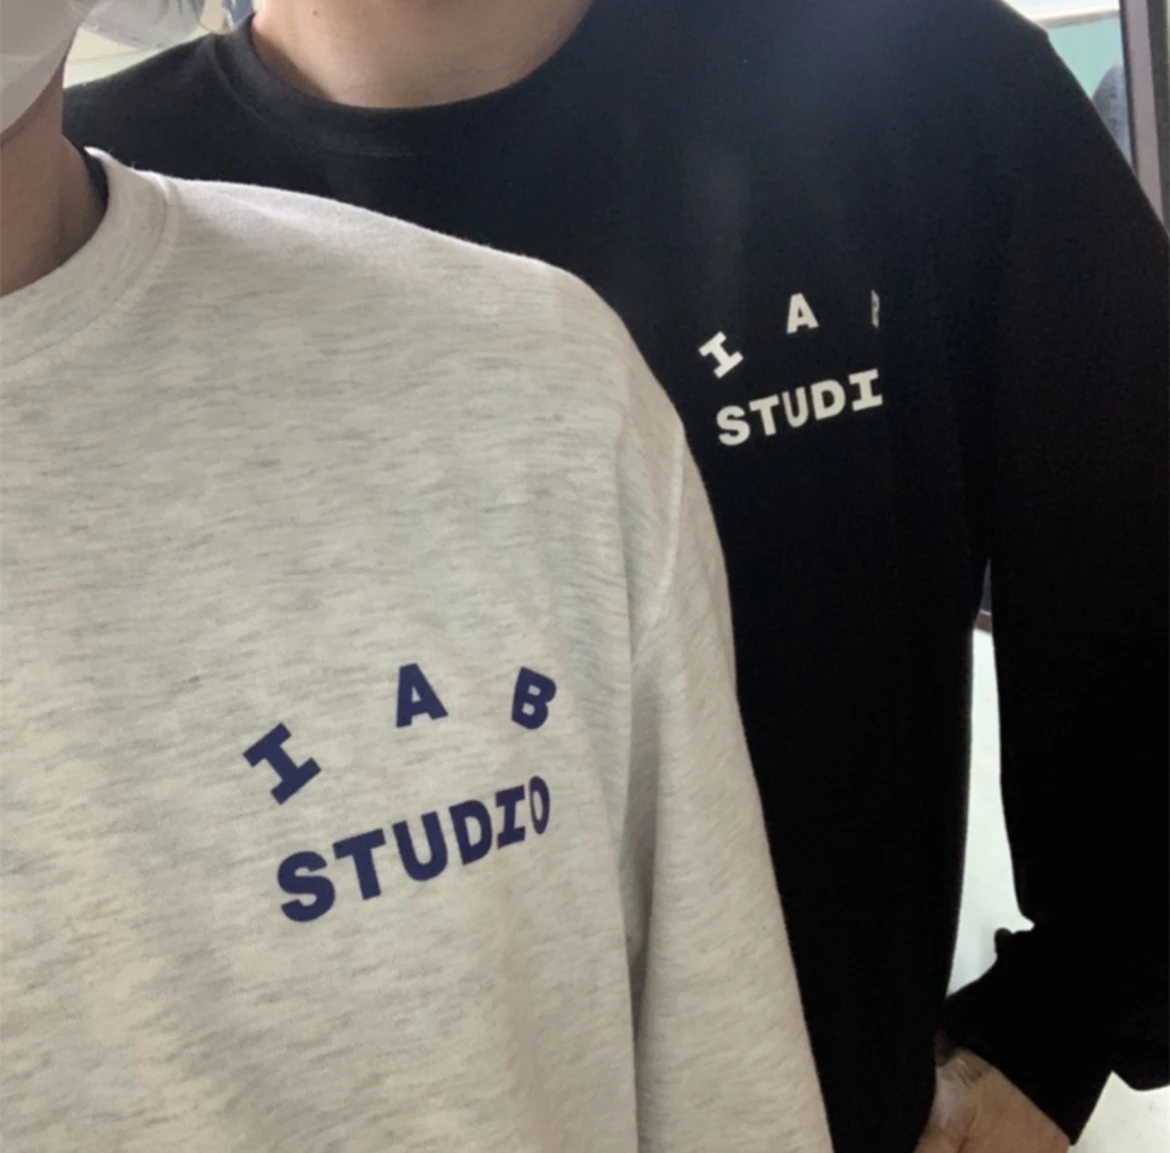 

IAB STUDIO T-shirt Round Neck Wweater With Contrast Color Long Sleeve Tee I've Been Sports Casual Pullover Couple Streetwear 우영미